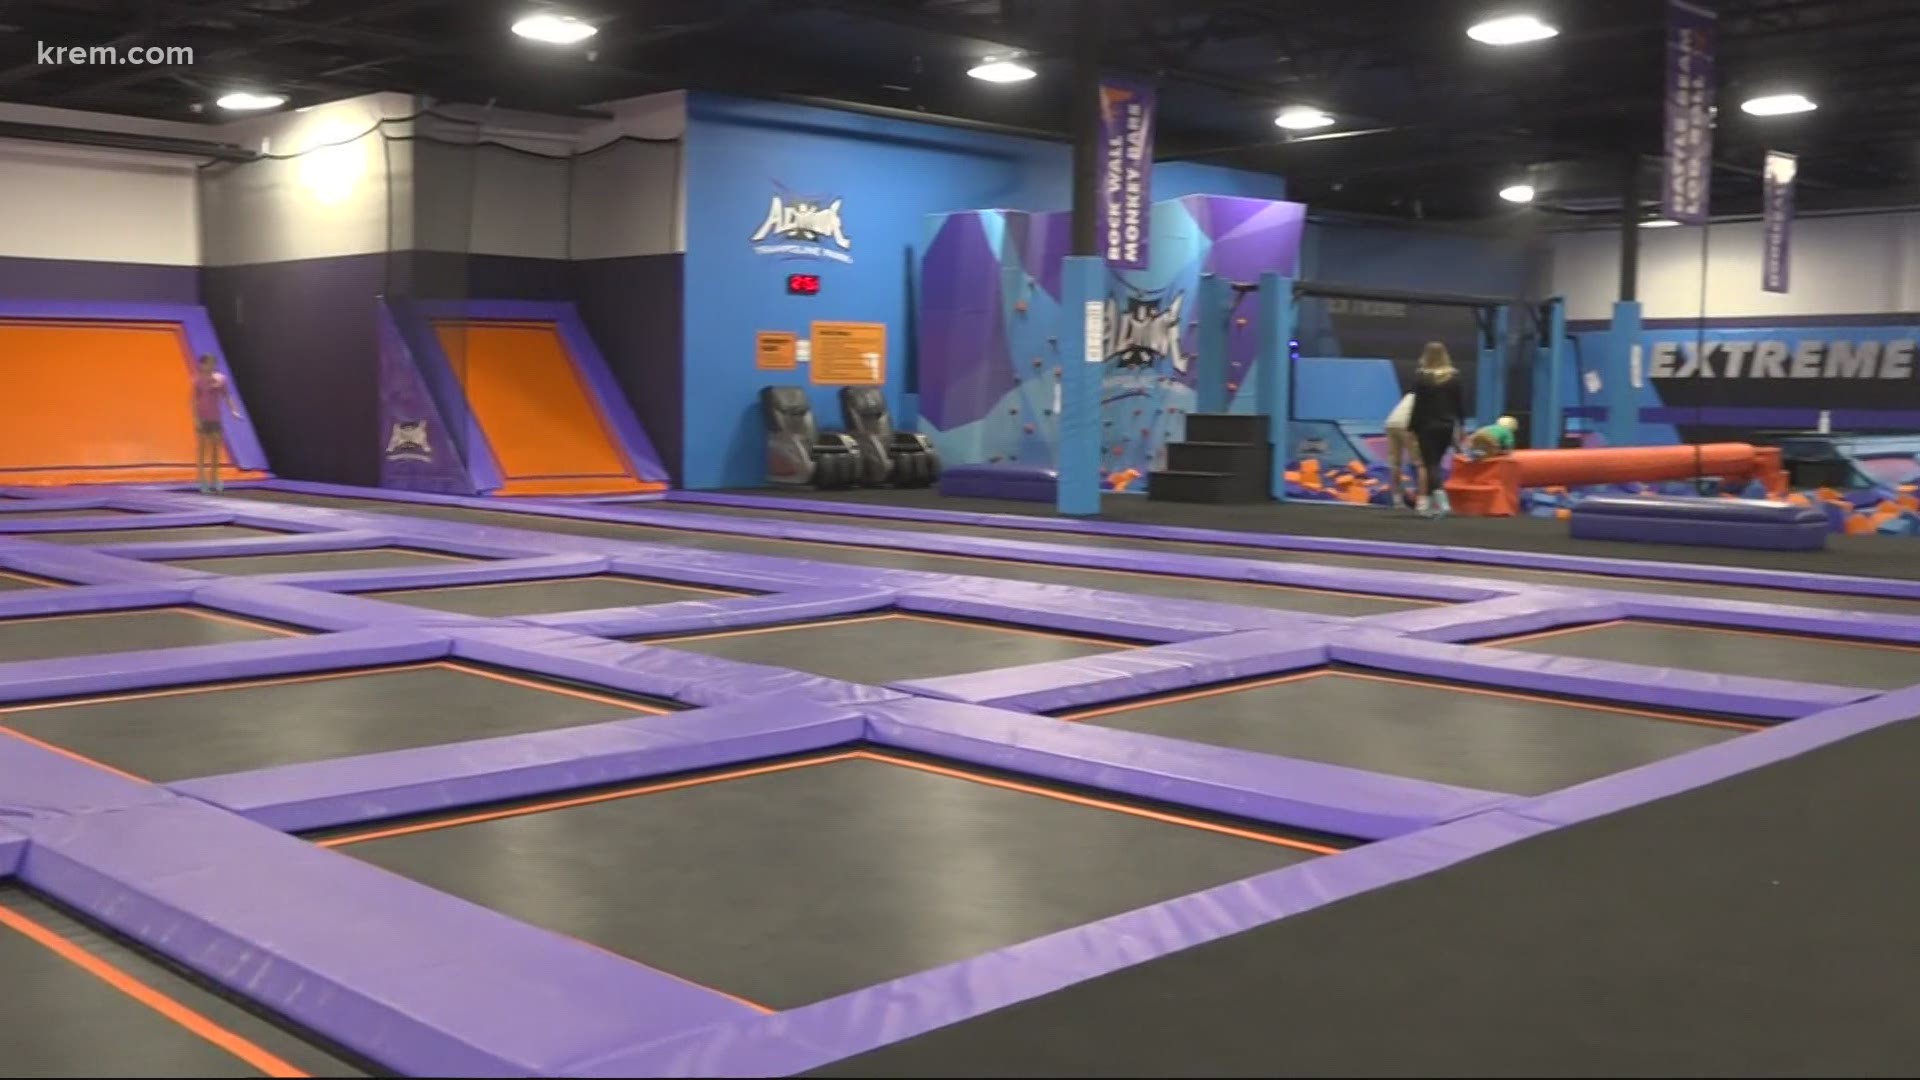 The owners of Altitude Trampoline Park must pay hefty fine for reopening before getting approval.